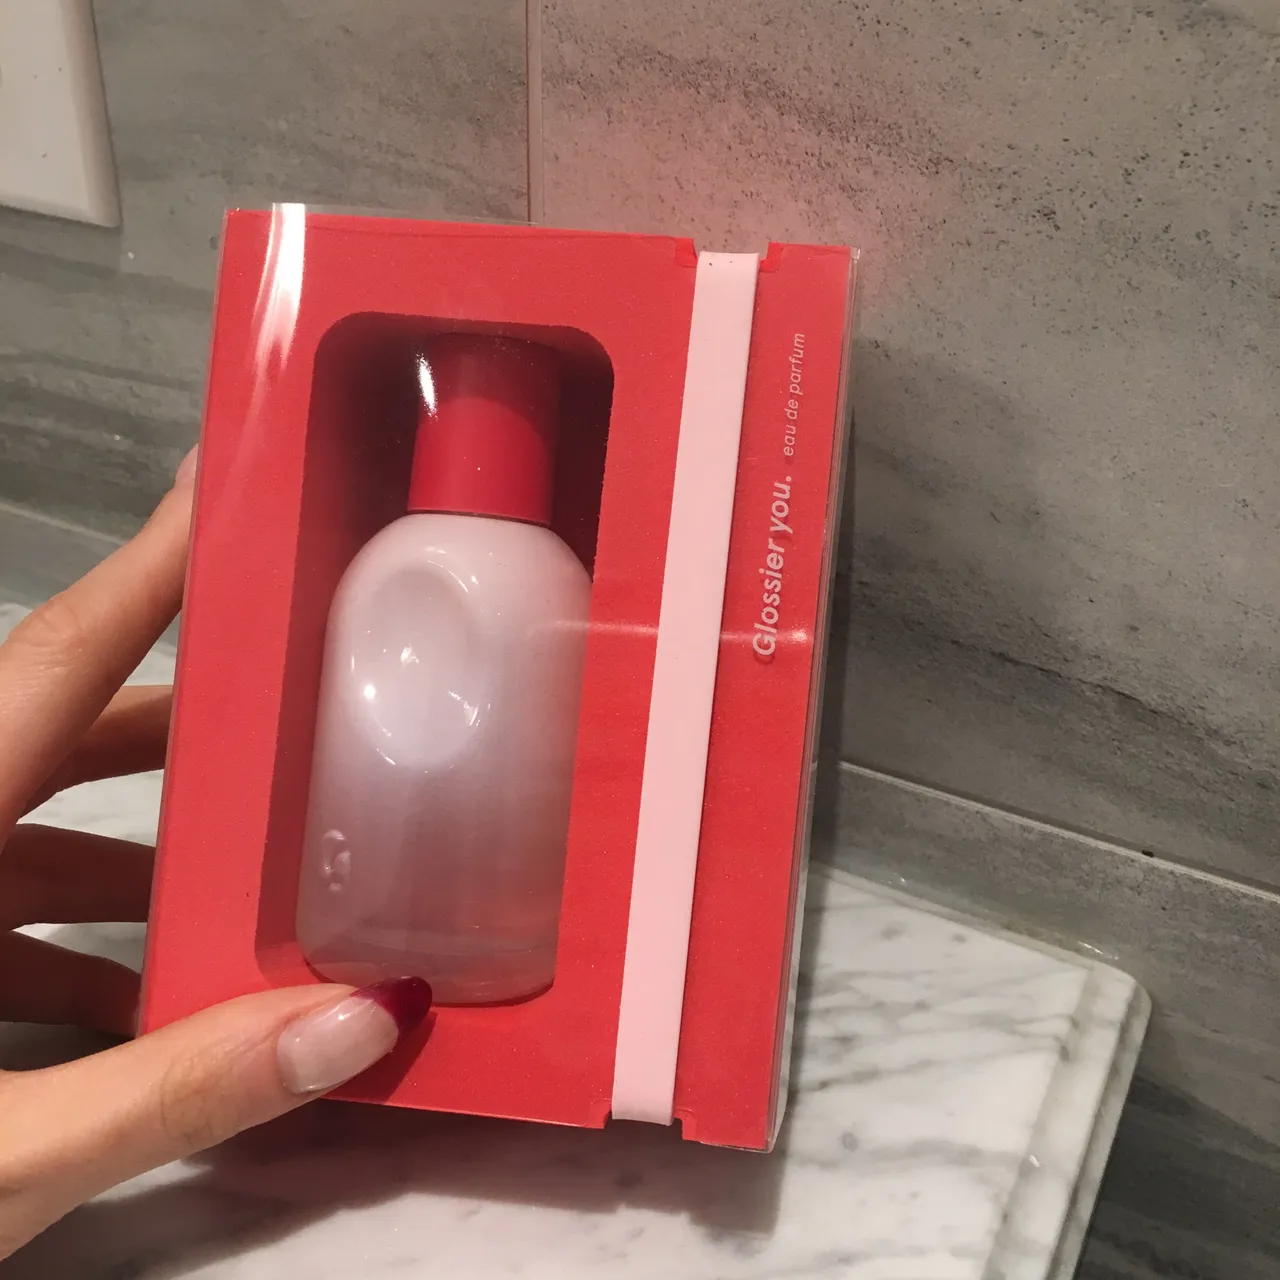 Glossier You Fragrance photo 3